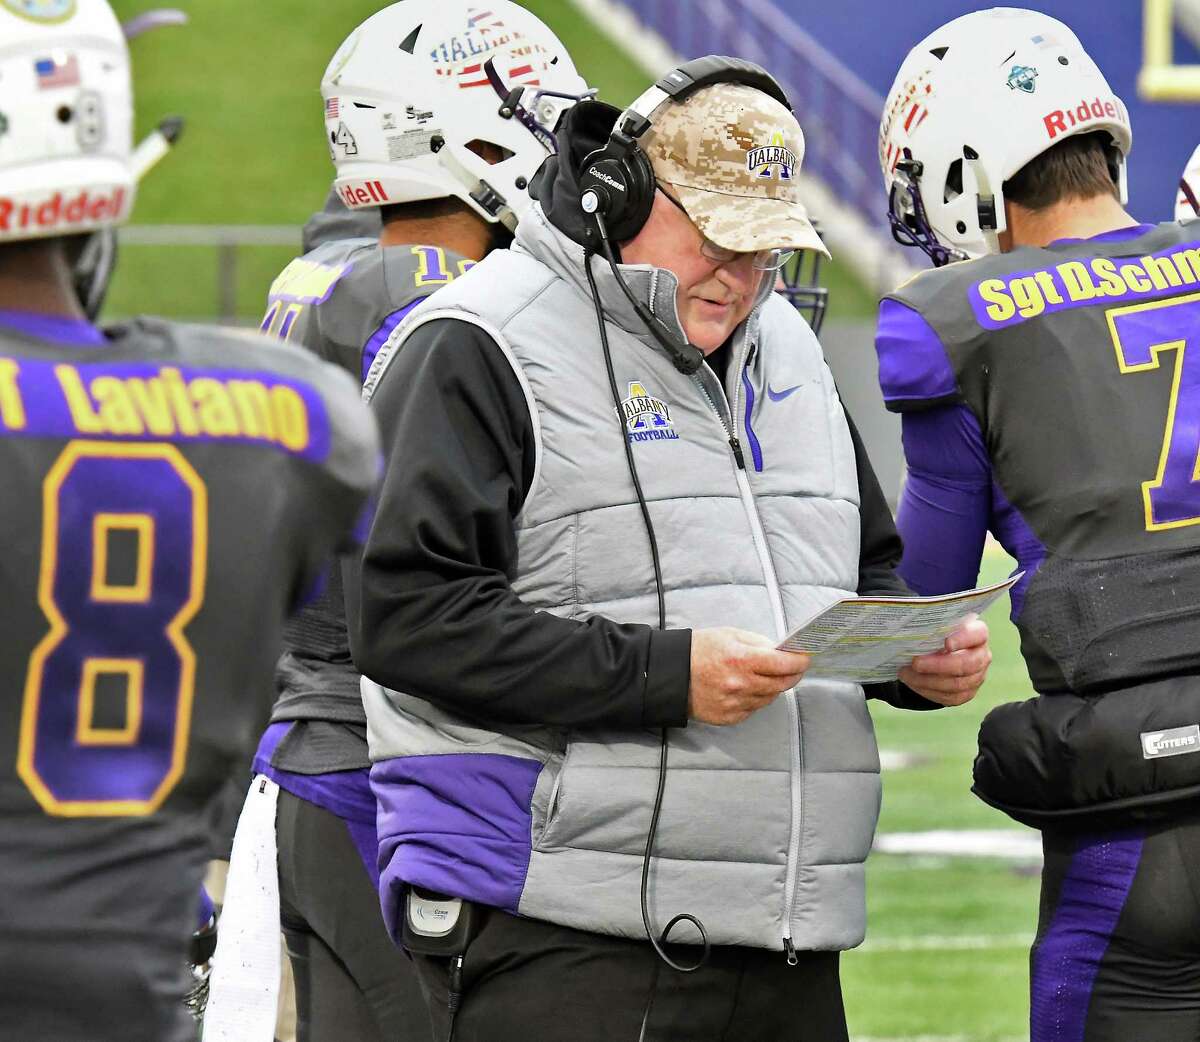 UAlbany head coach Greg Gattuso, center, on the sidelines during their Colonial Athletic Association game against New Hampshire Saturday Nov. 18, 2017 in Albany, NY. (John Carl D'Annibale / Times Union)